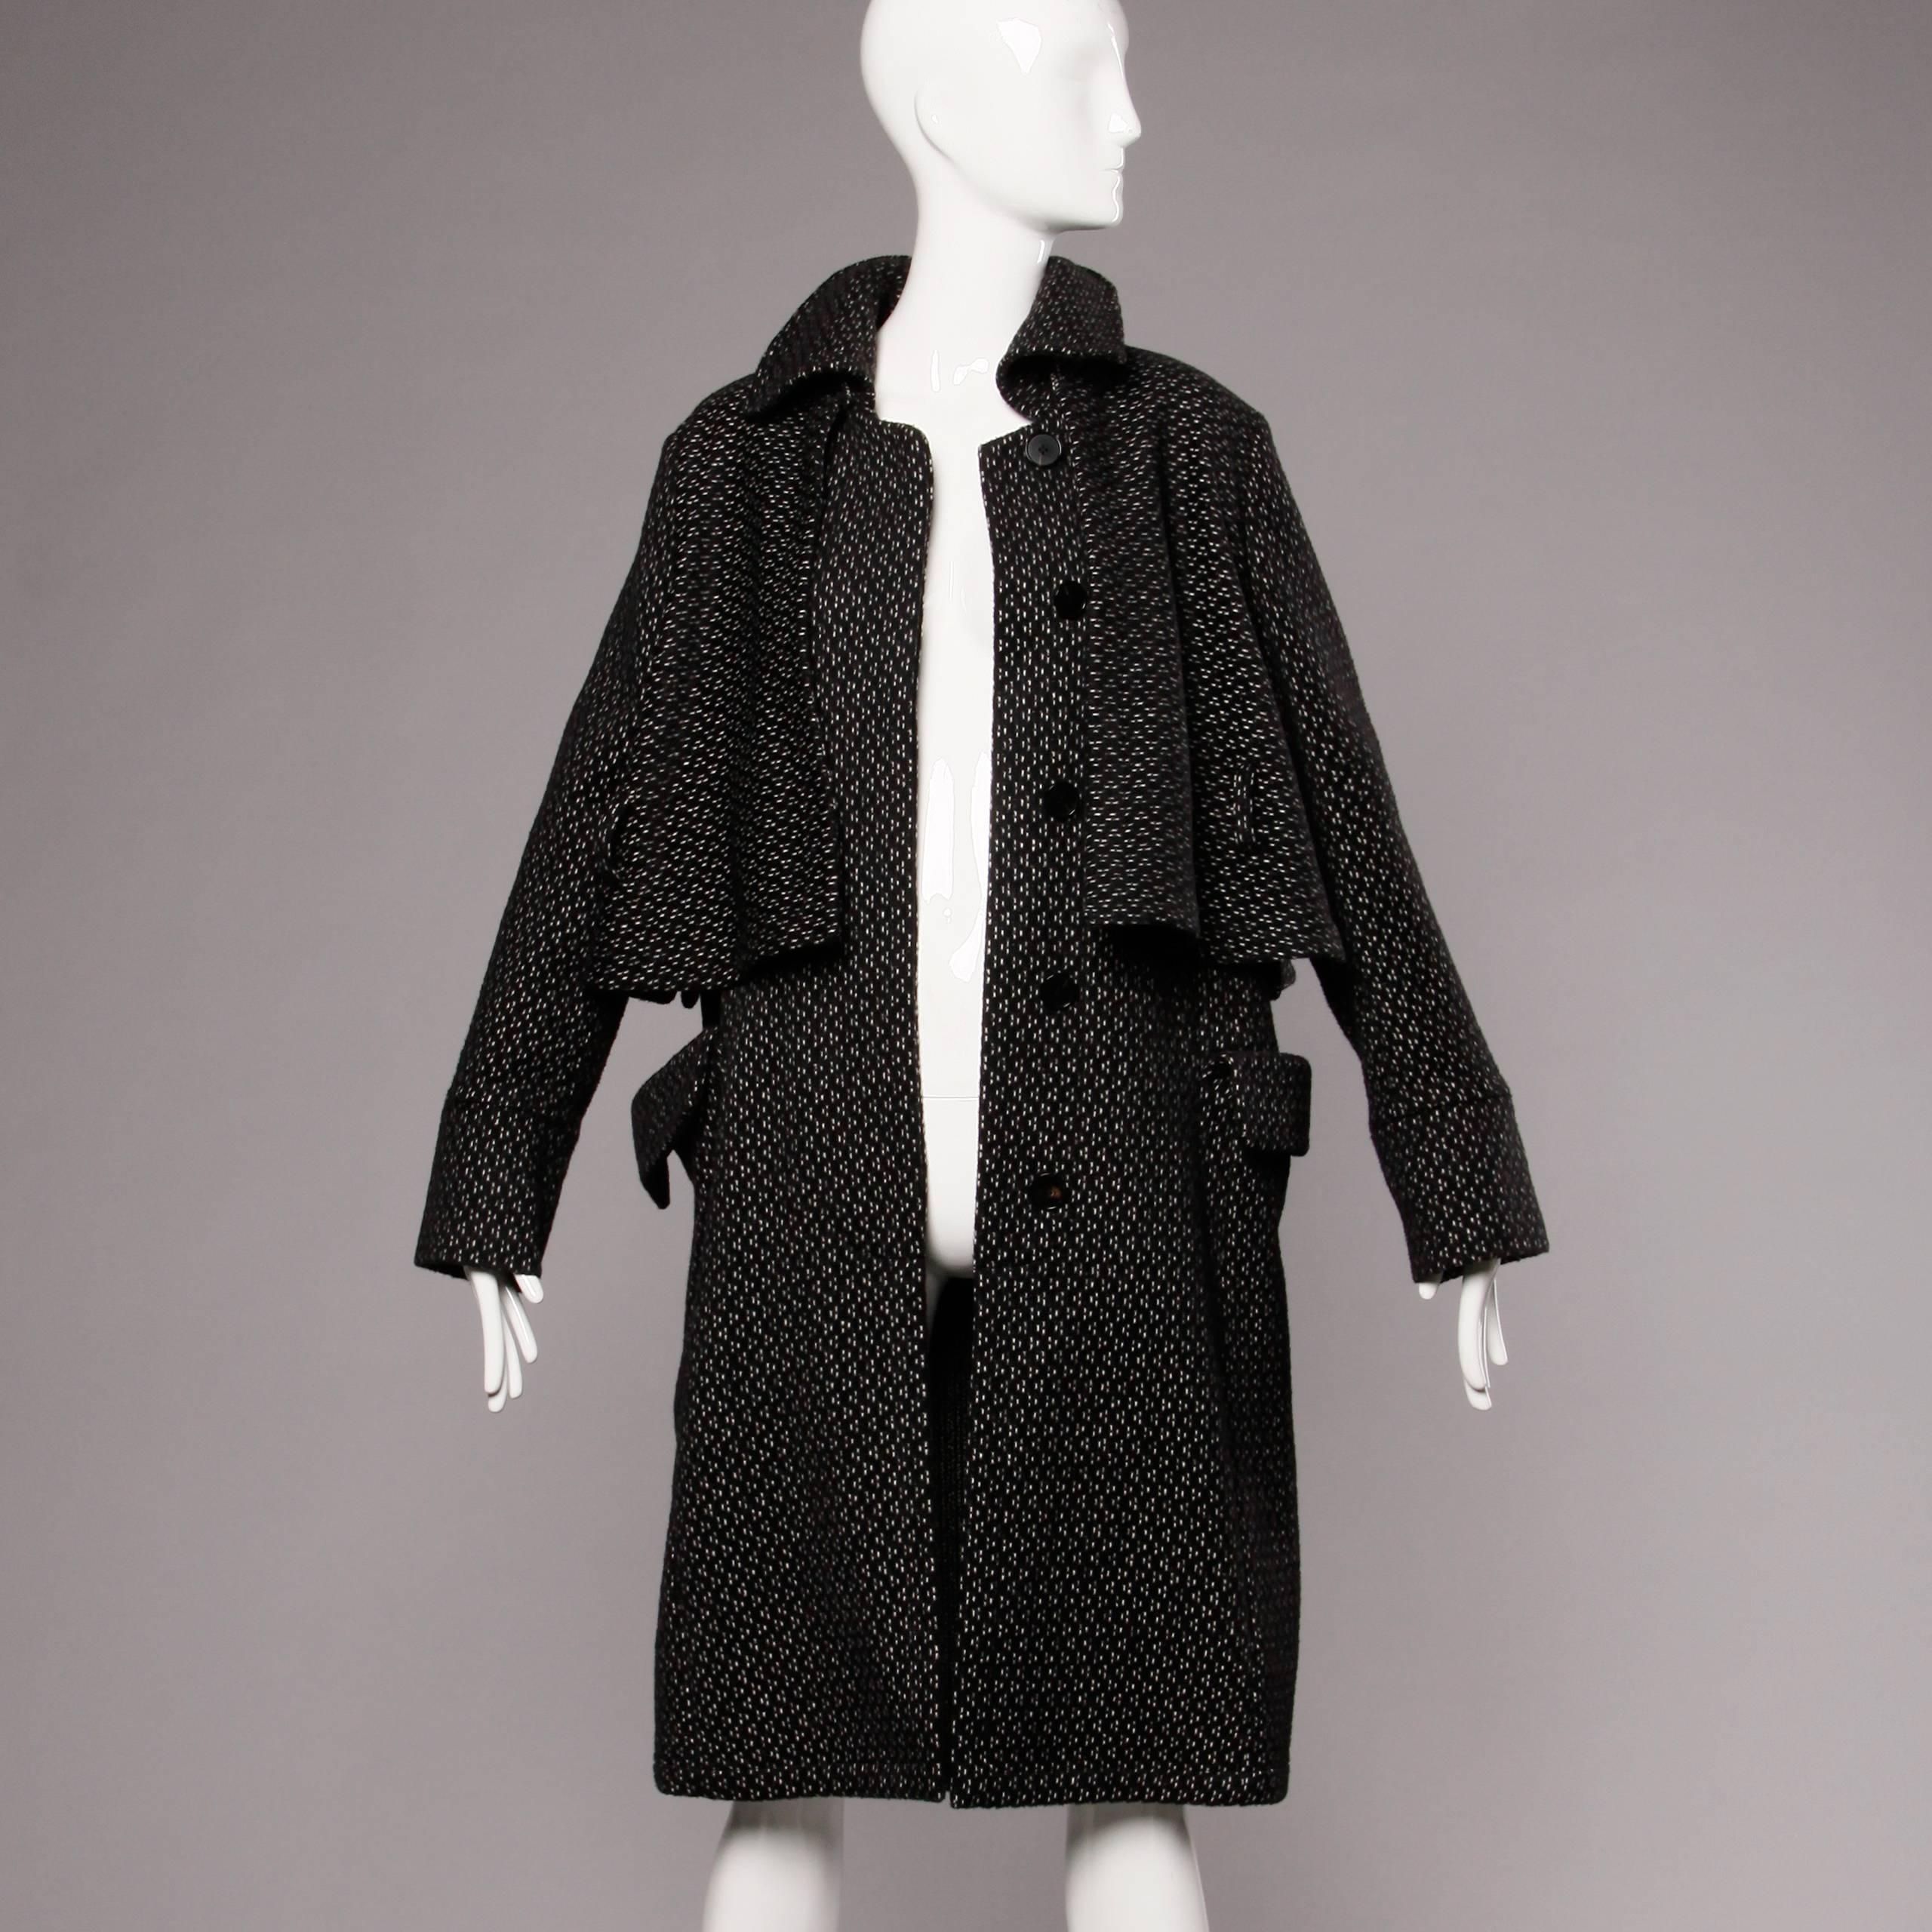 Gianfranco Ferre Soft Wool + Alpaca Avant Garde Coat with Cape Detail In Excellent Condition For Sale In Sparks, NV